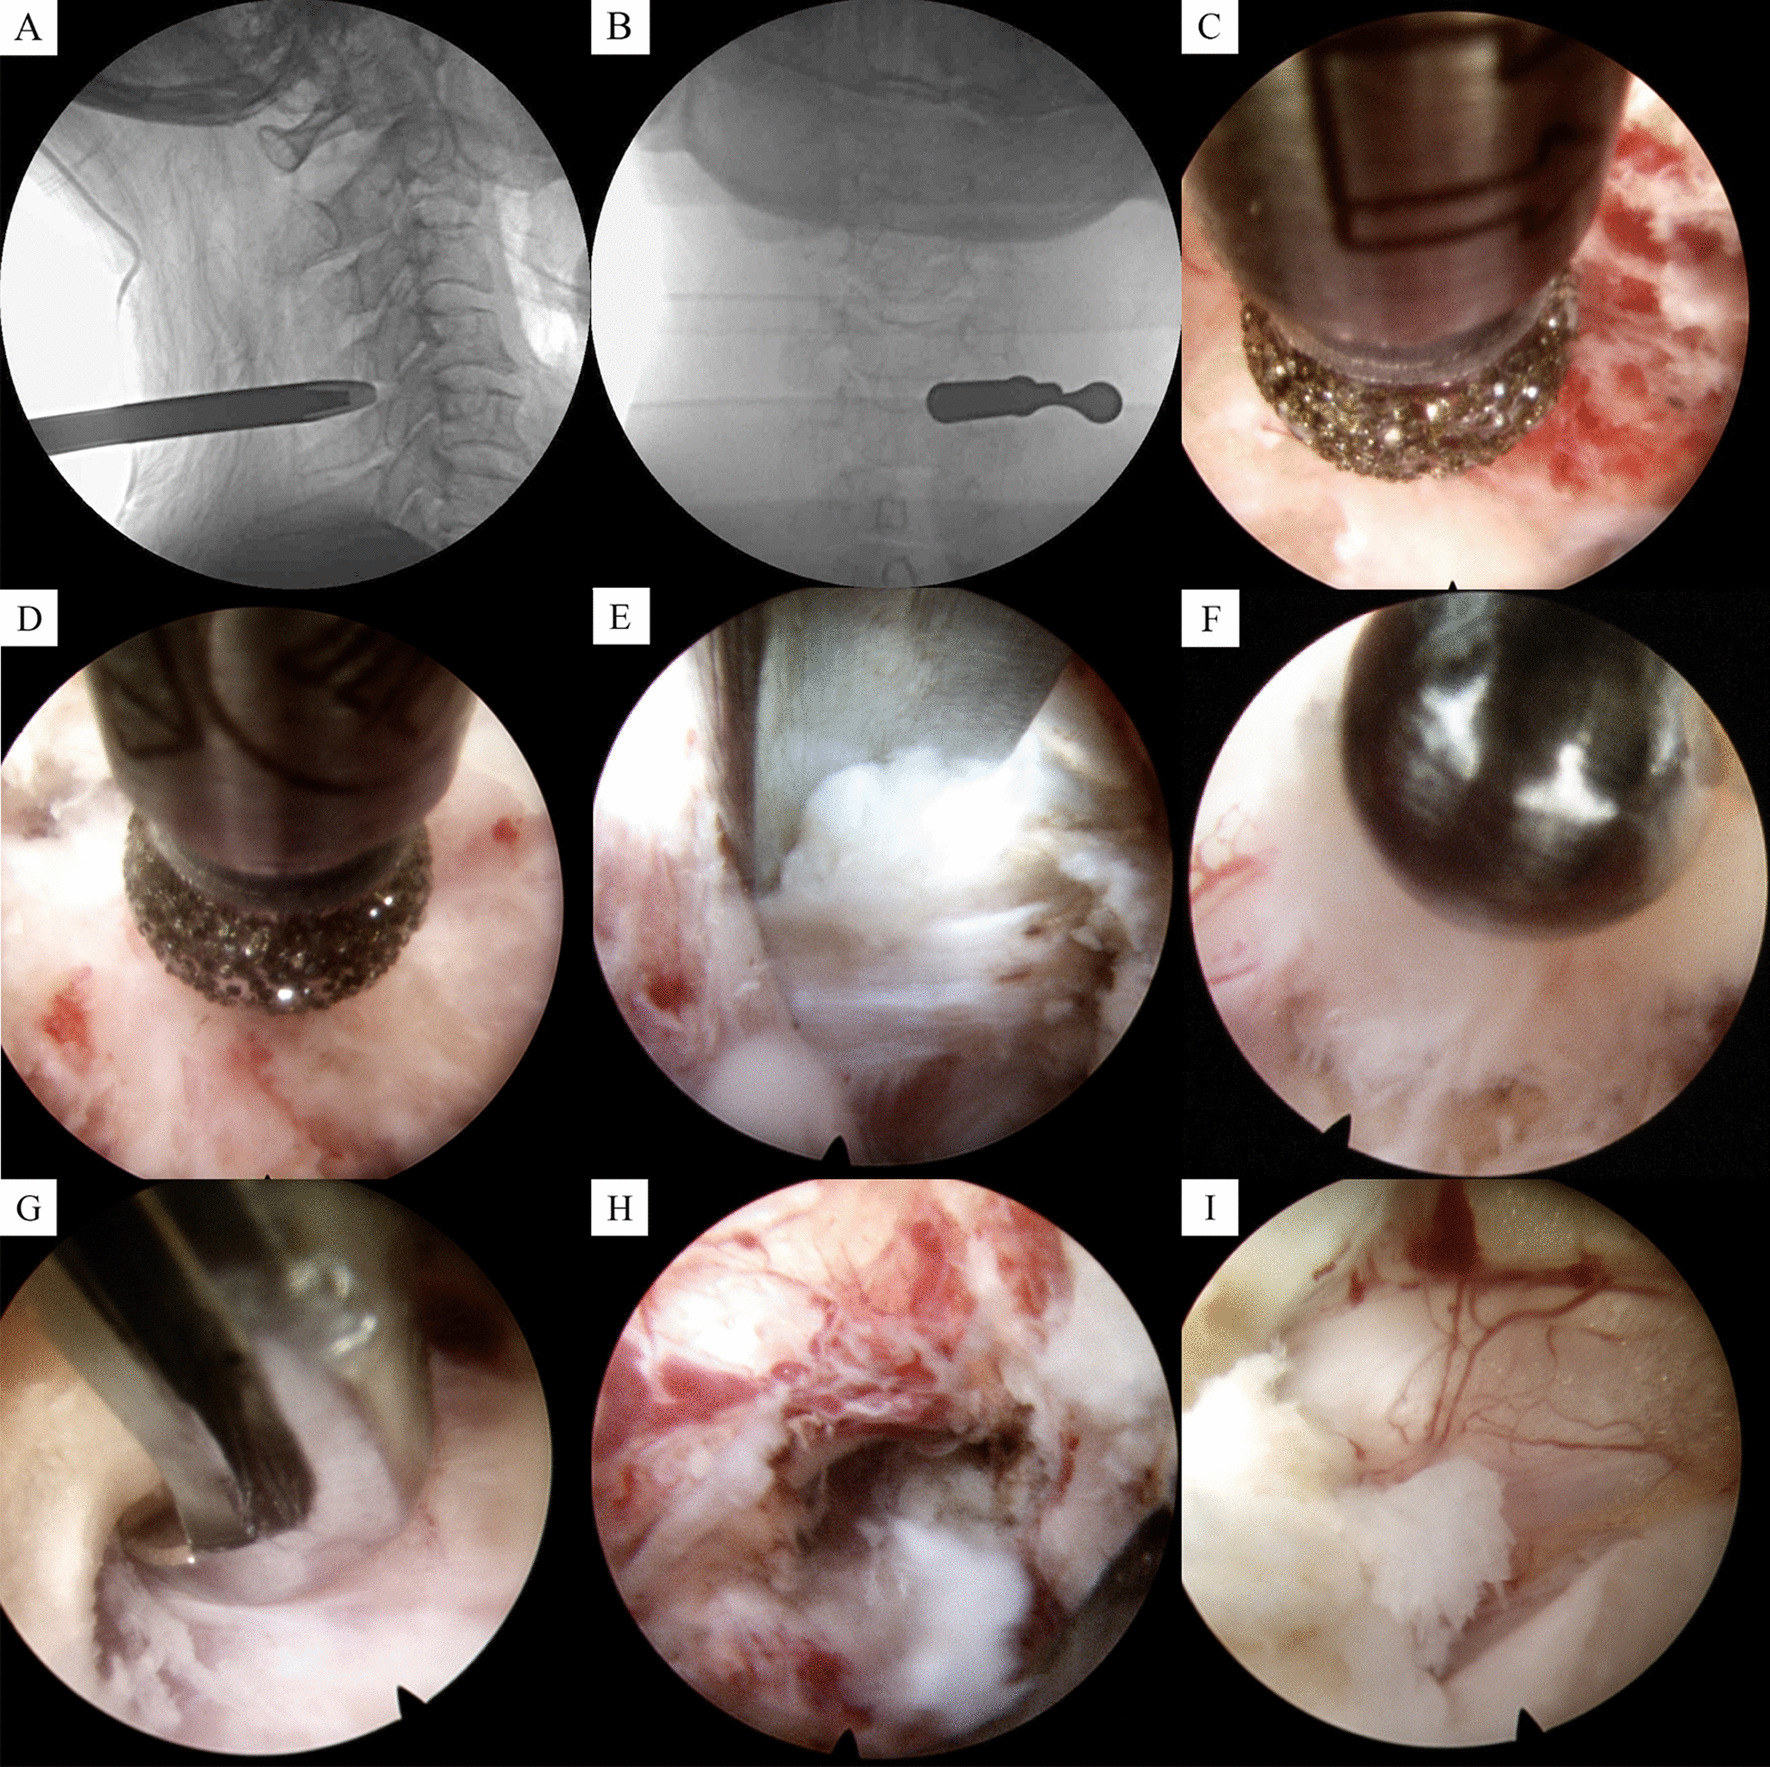 Full endoscopic laminotomy decompression versus anterior cervical discectomy and fusion for the treatment of single-segment cervical spinal stenosis: a retrospective, propensity score-matched study